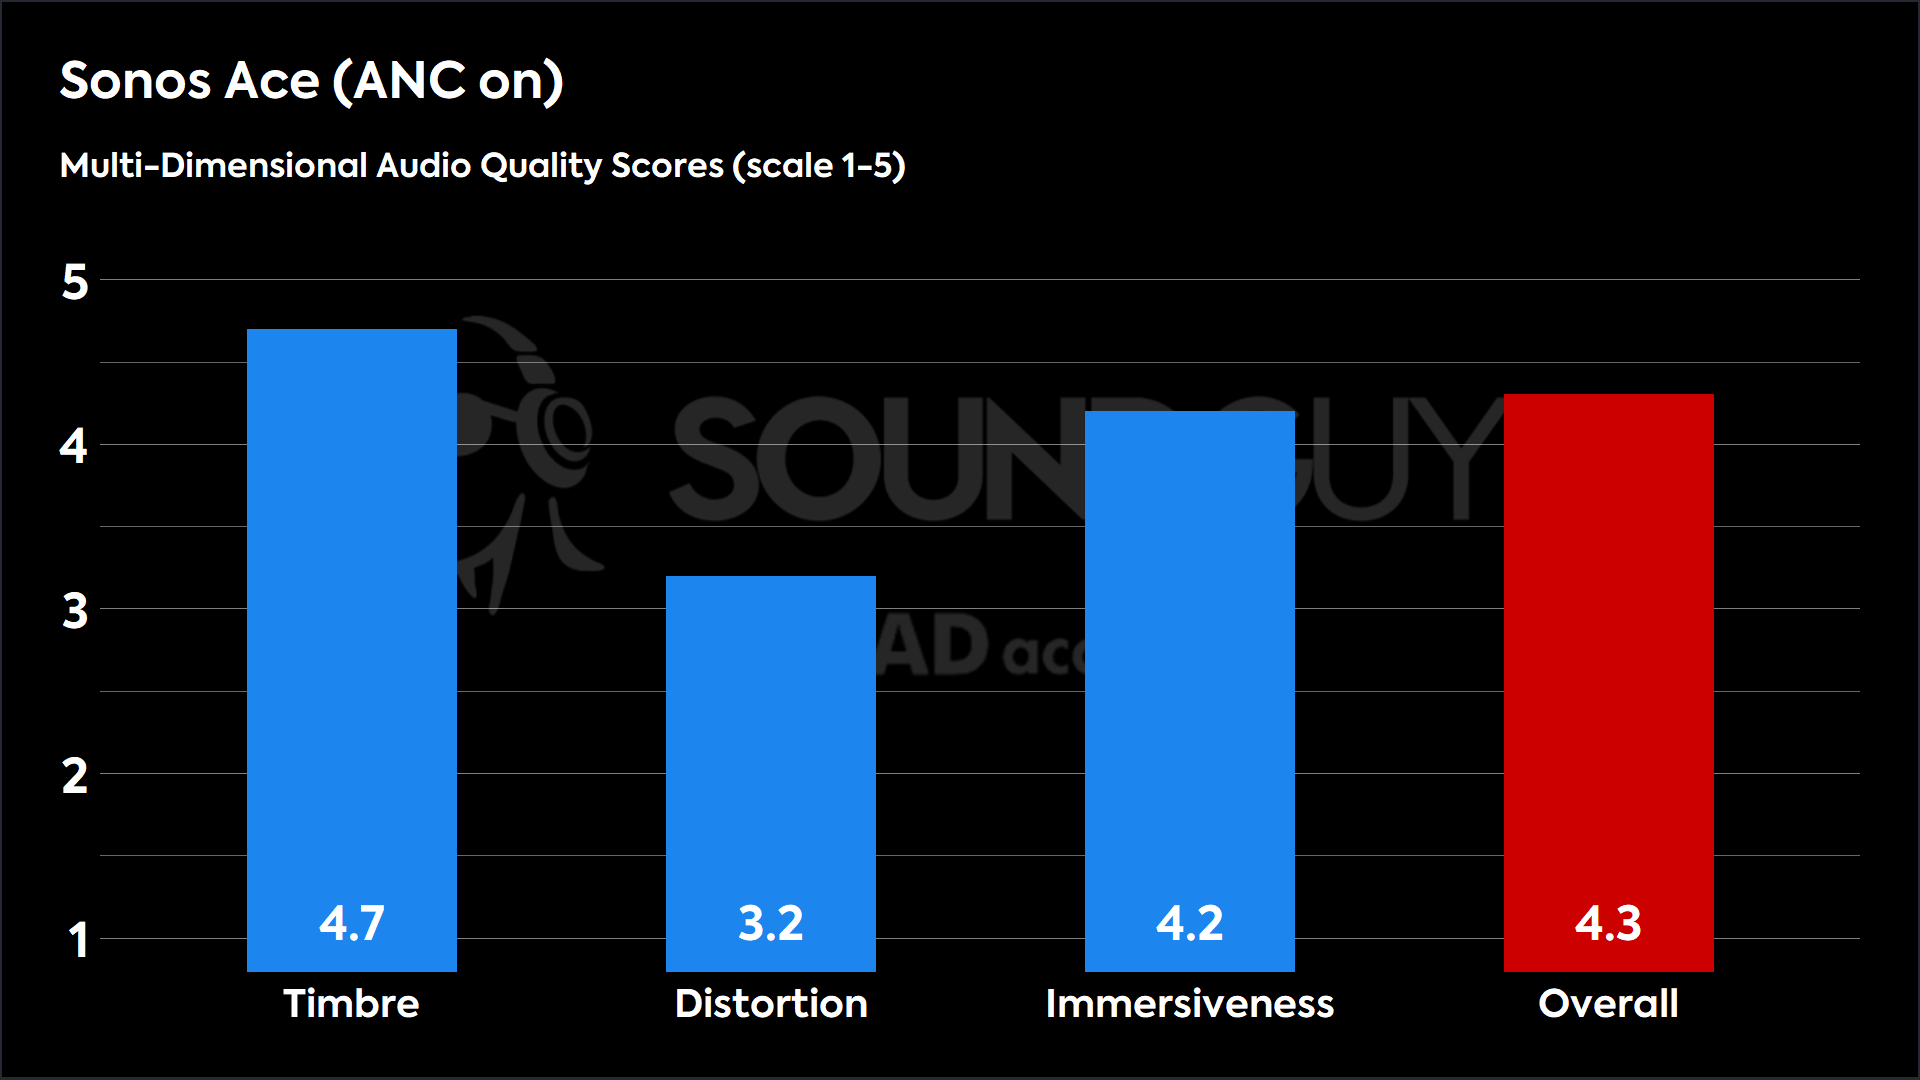 This chart shows the MDAQS results for the Sonos Ace in ANC on mode. The Timbre score is 4.7, The Distortion score is 3.2, the Immersiveness score is 4.2, and the Overall Score is 4.3).